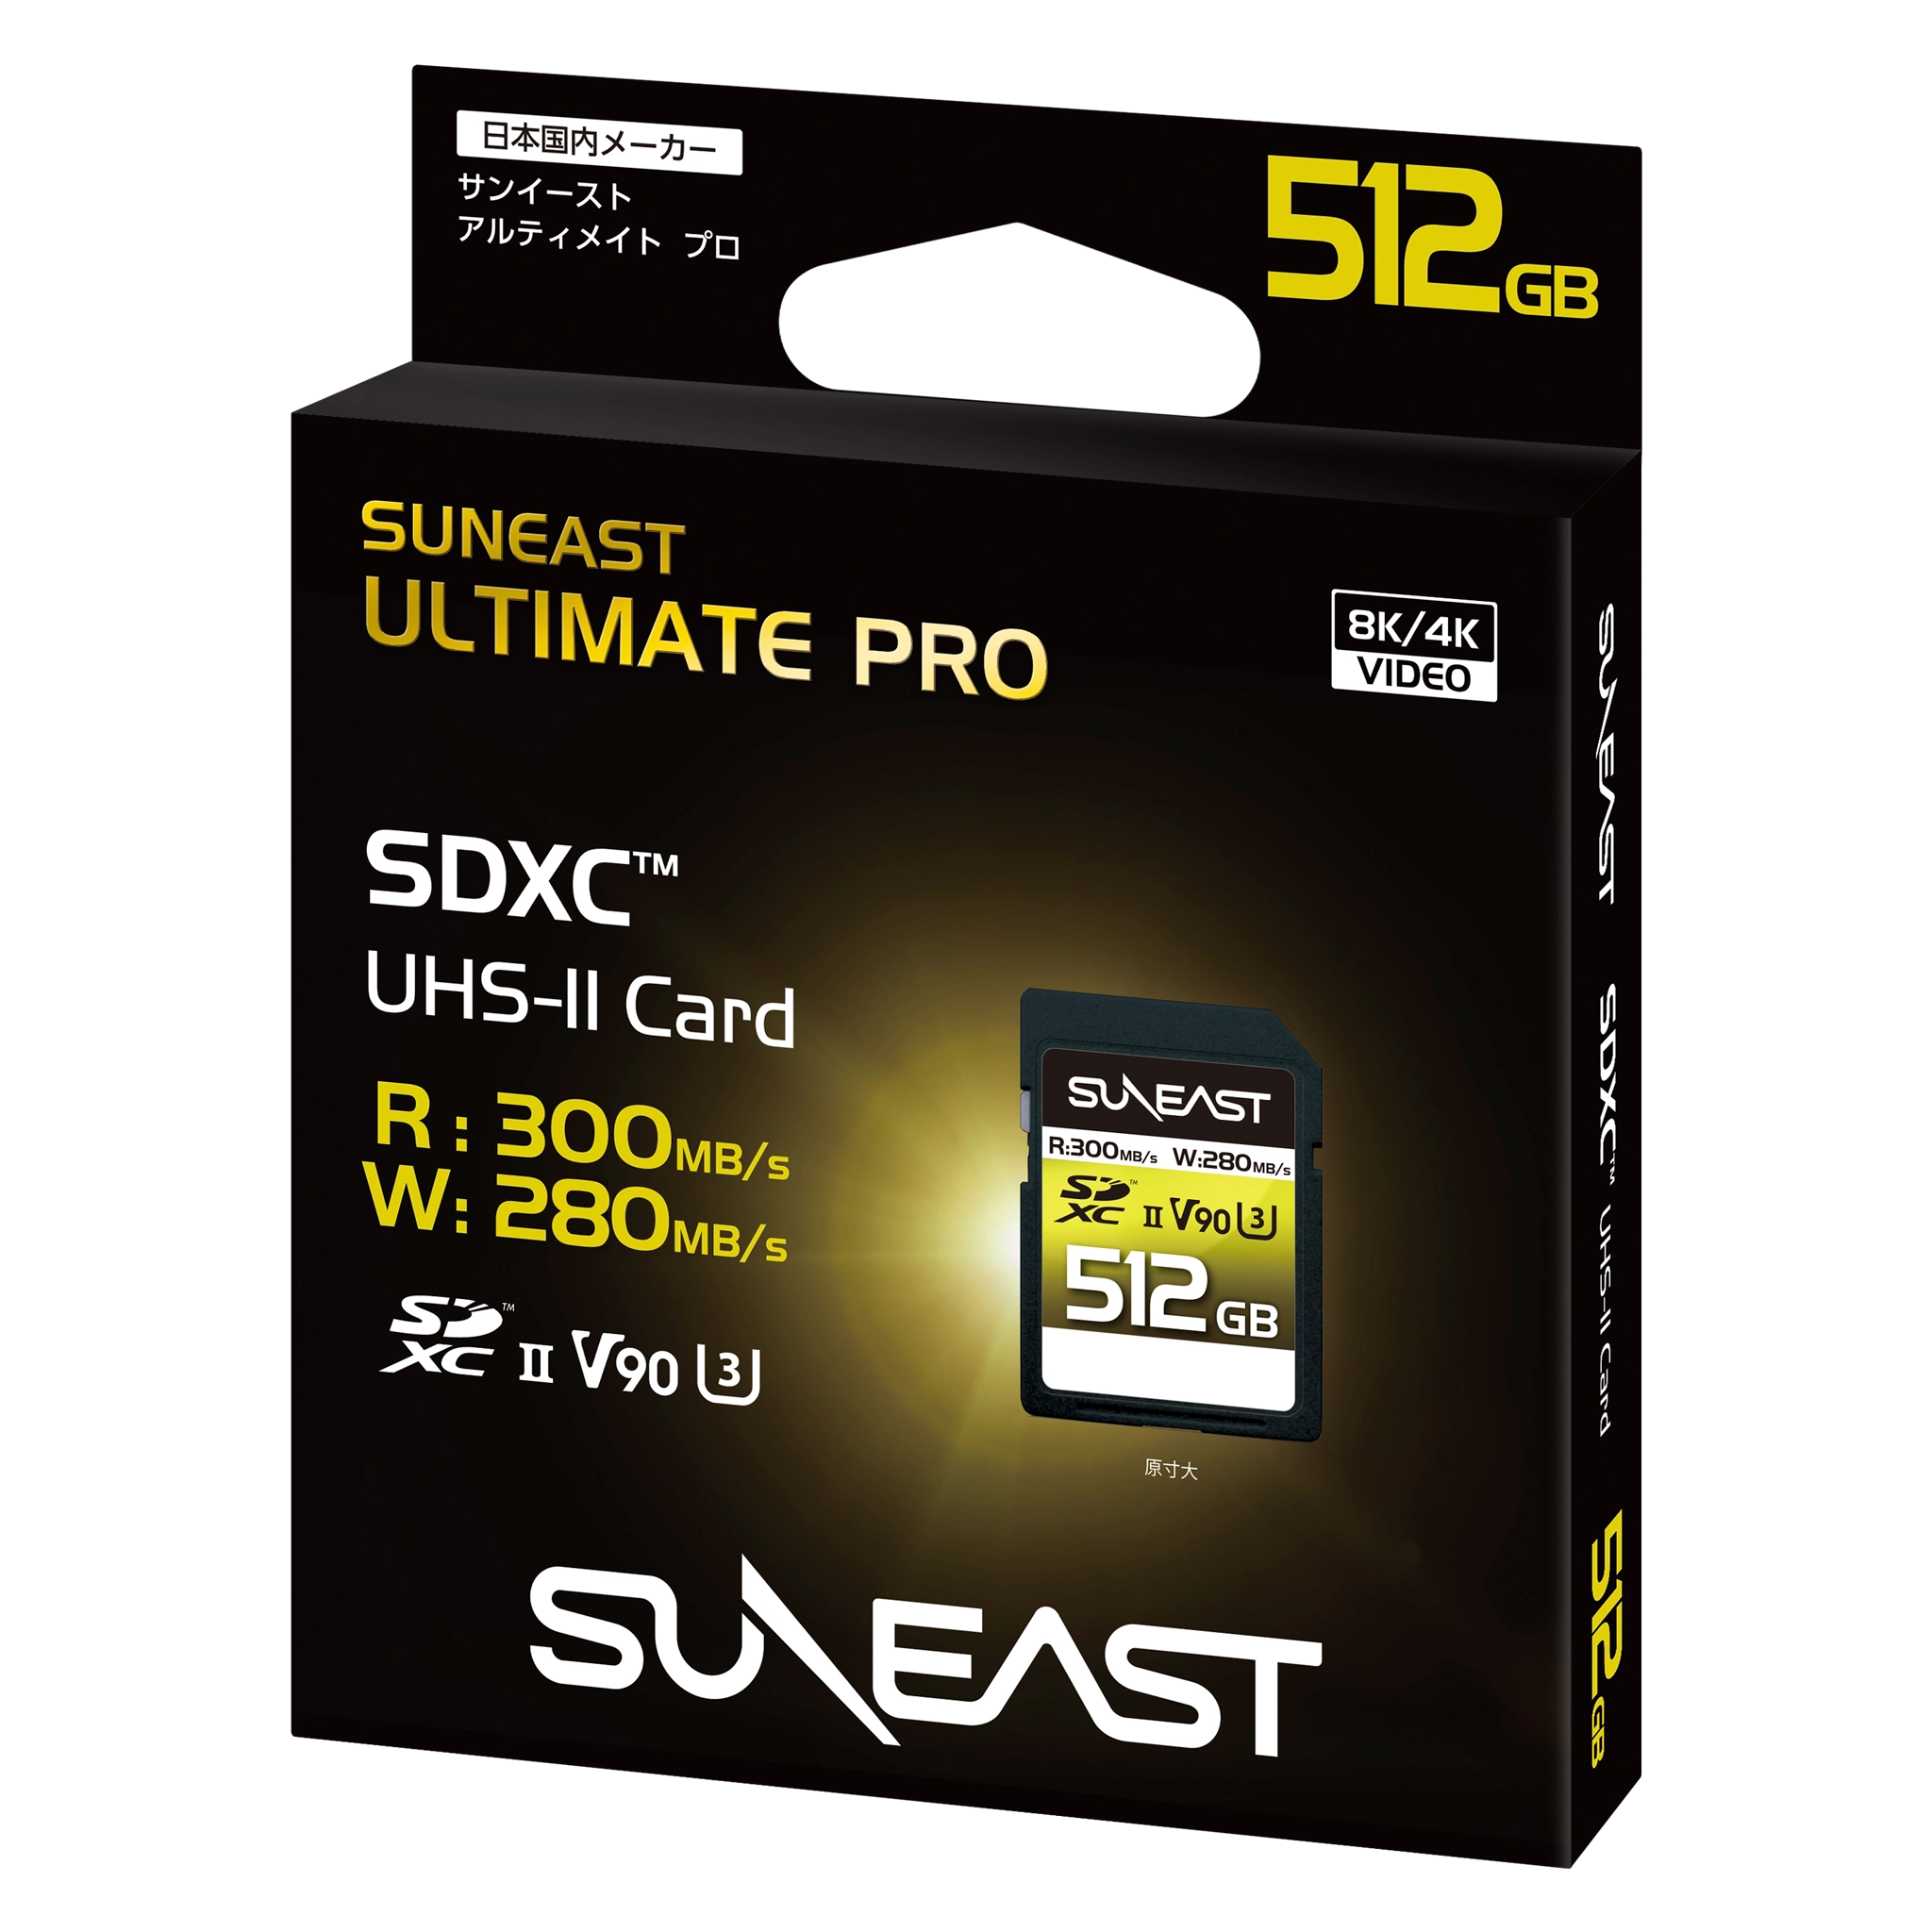 ULTIMATE PRO SDXC UHS-II Card【V90】512GB - SUNEAST online store